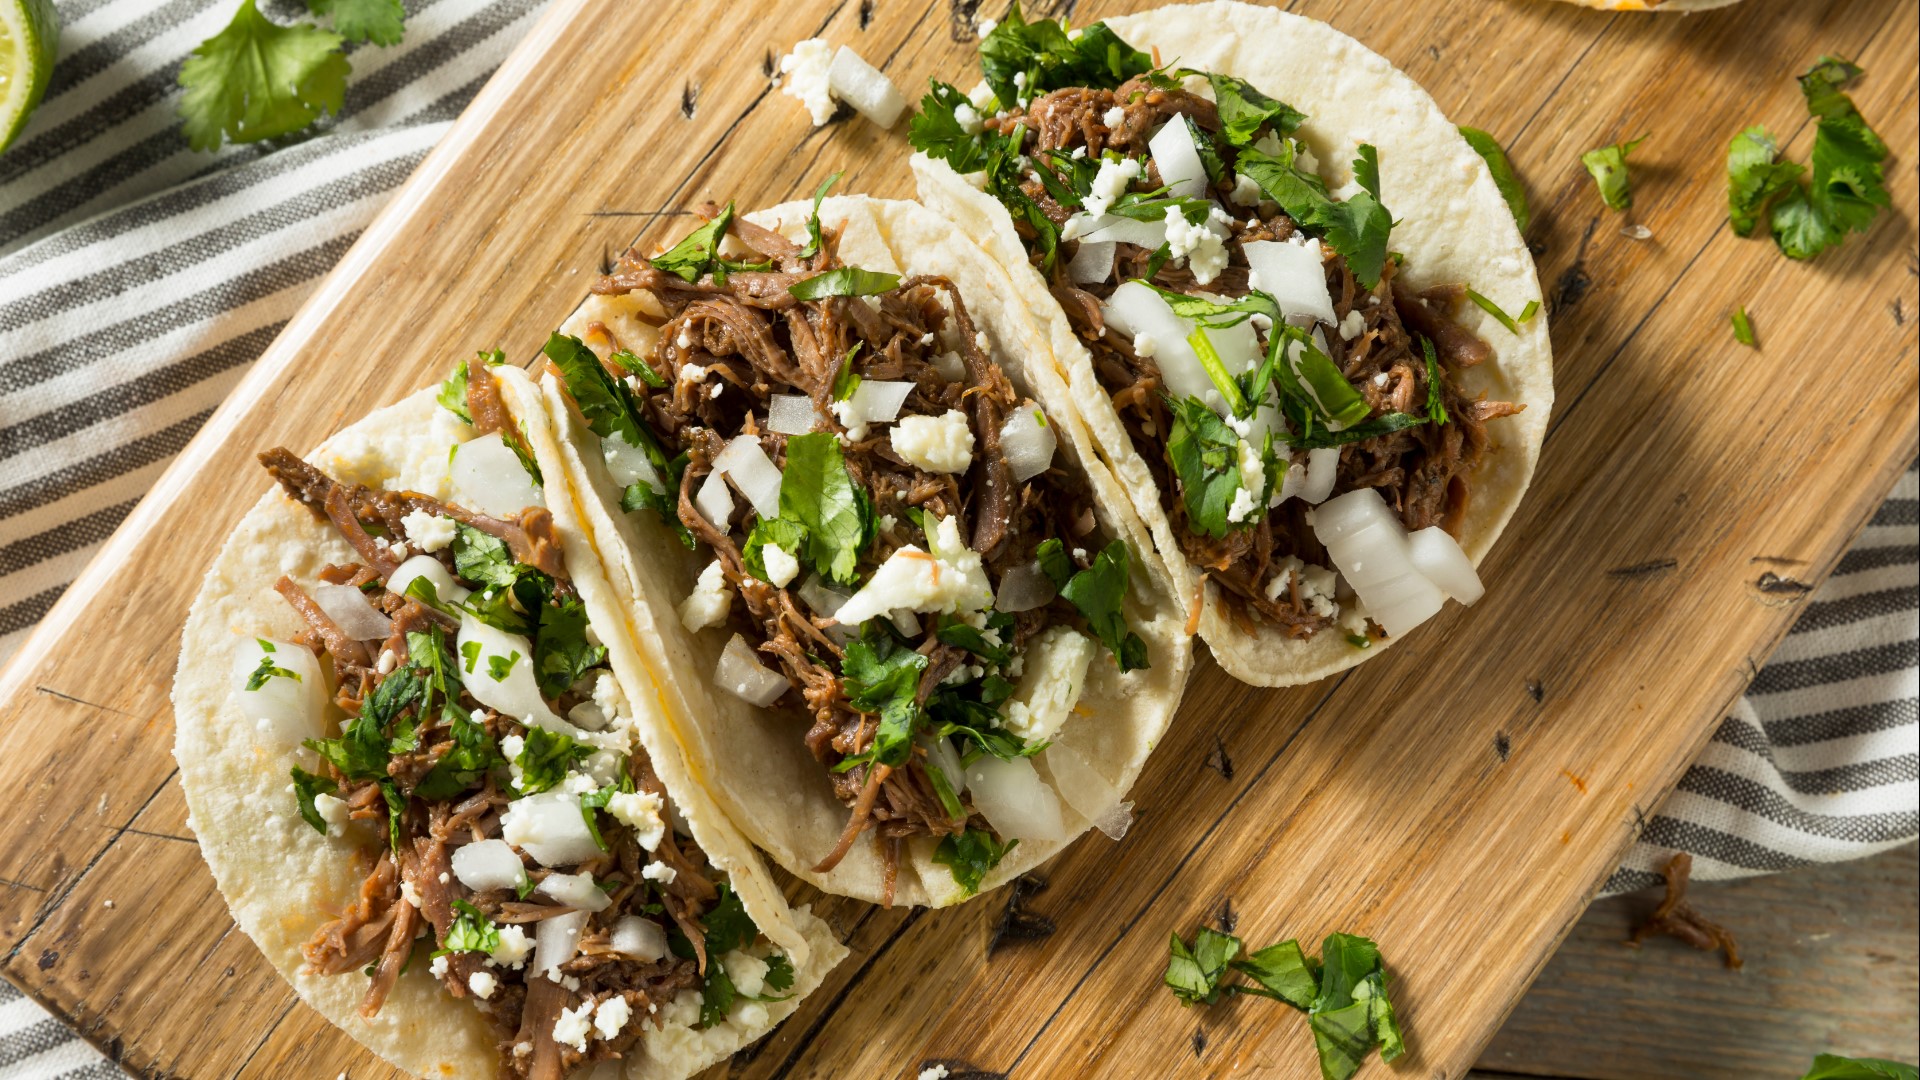 Winter Park Resort will be hosting its annual Tacos + Margs in the Mountains on Saturday, Aug. 26.